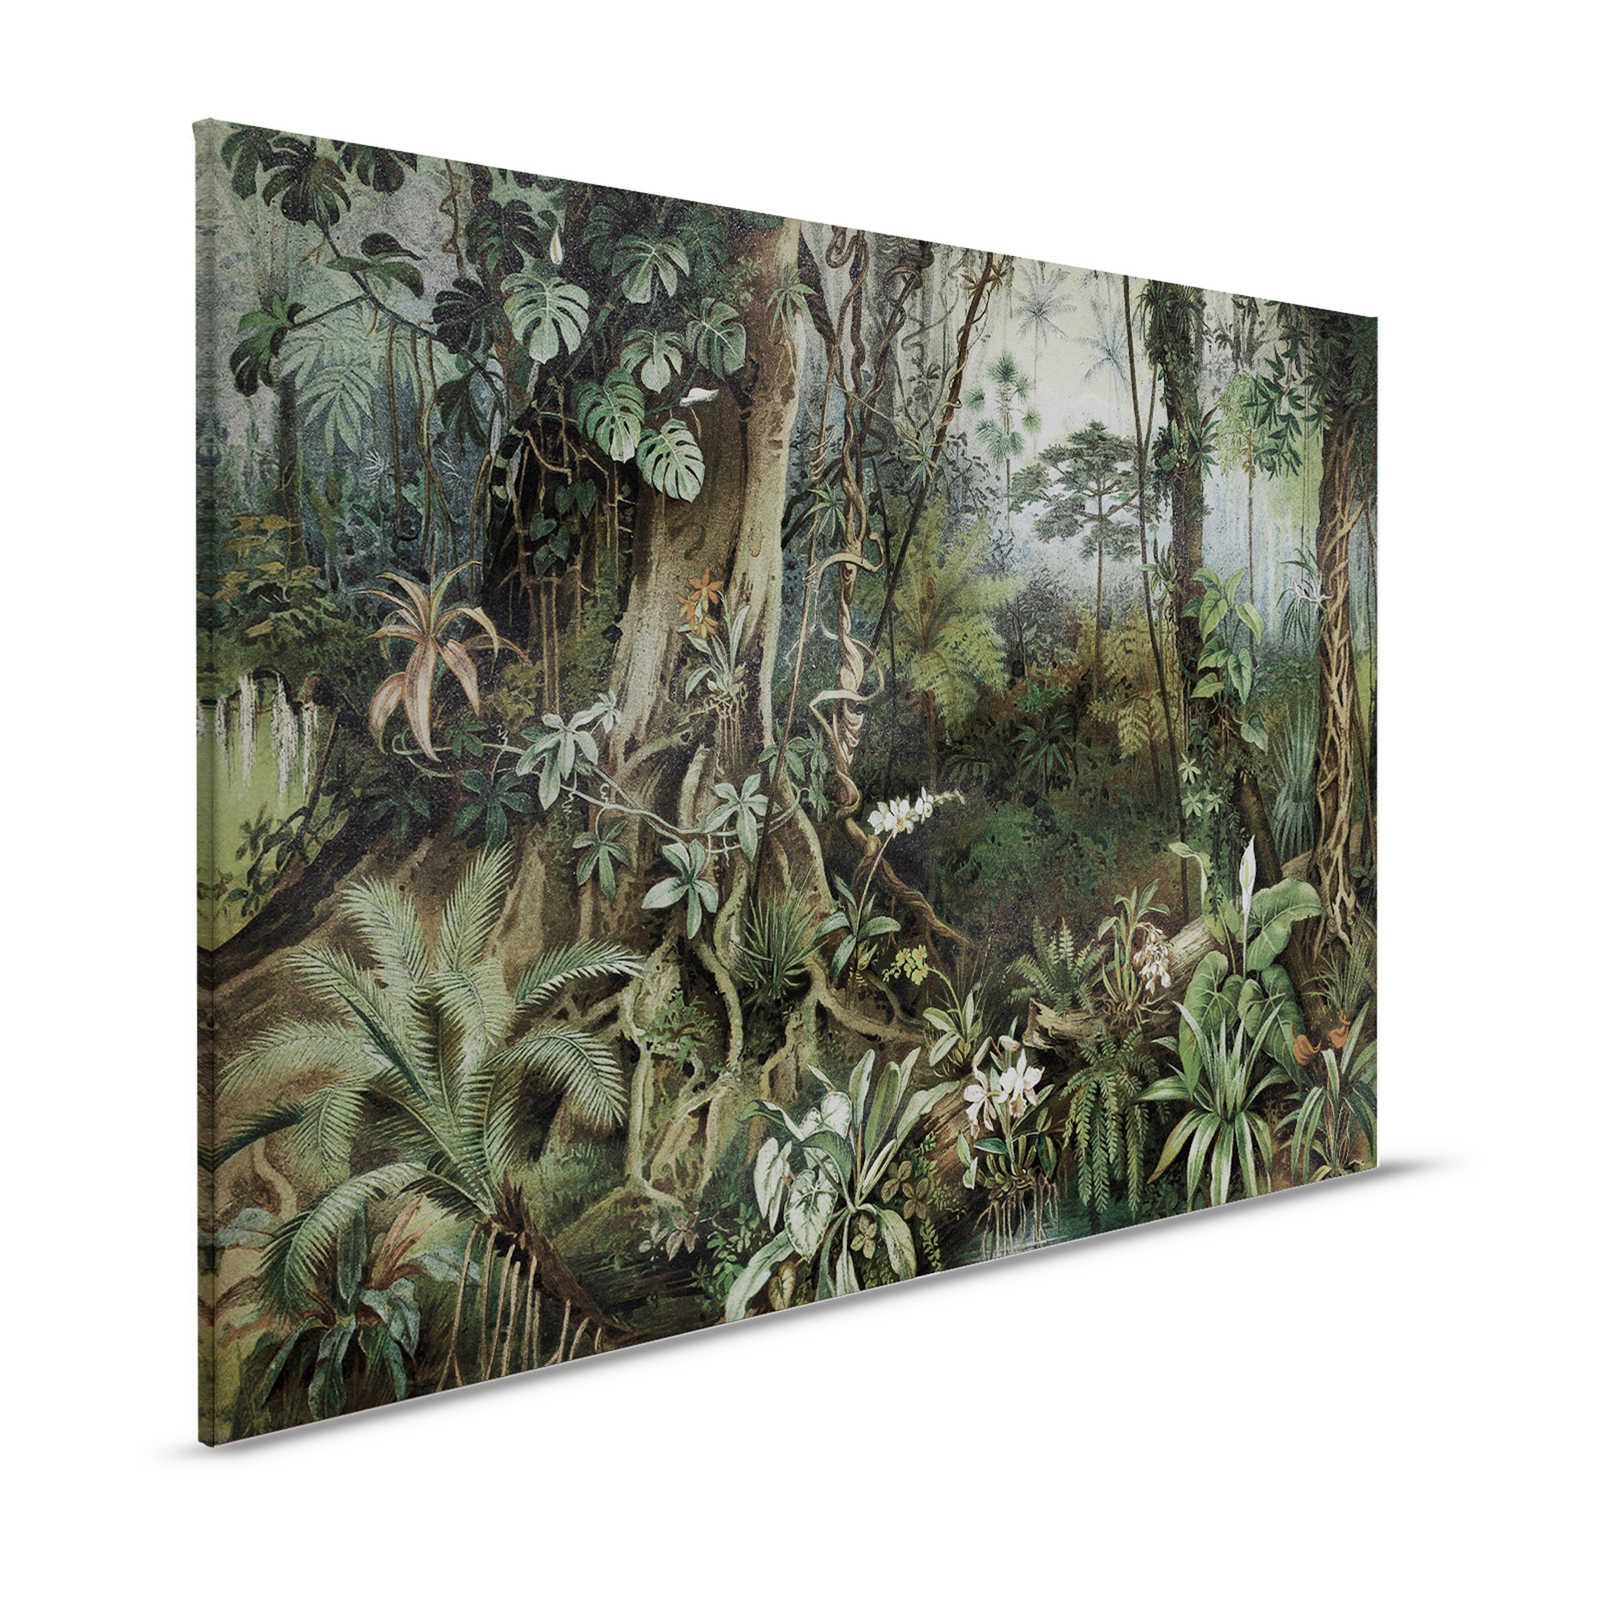 Jungle Drawing Style Canvas Picture - 1.20 m x 0.80 m
